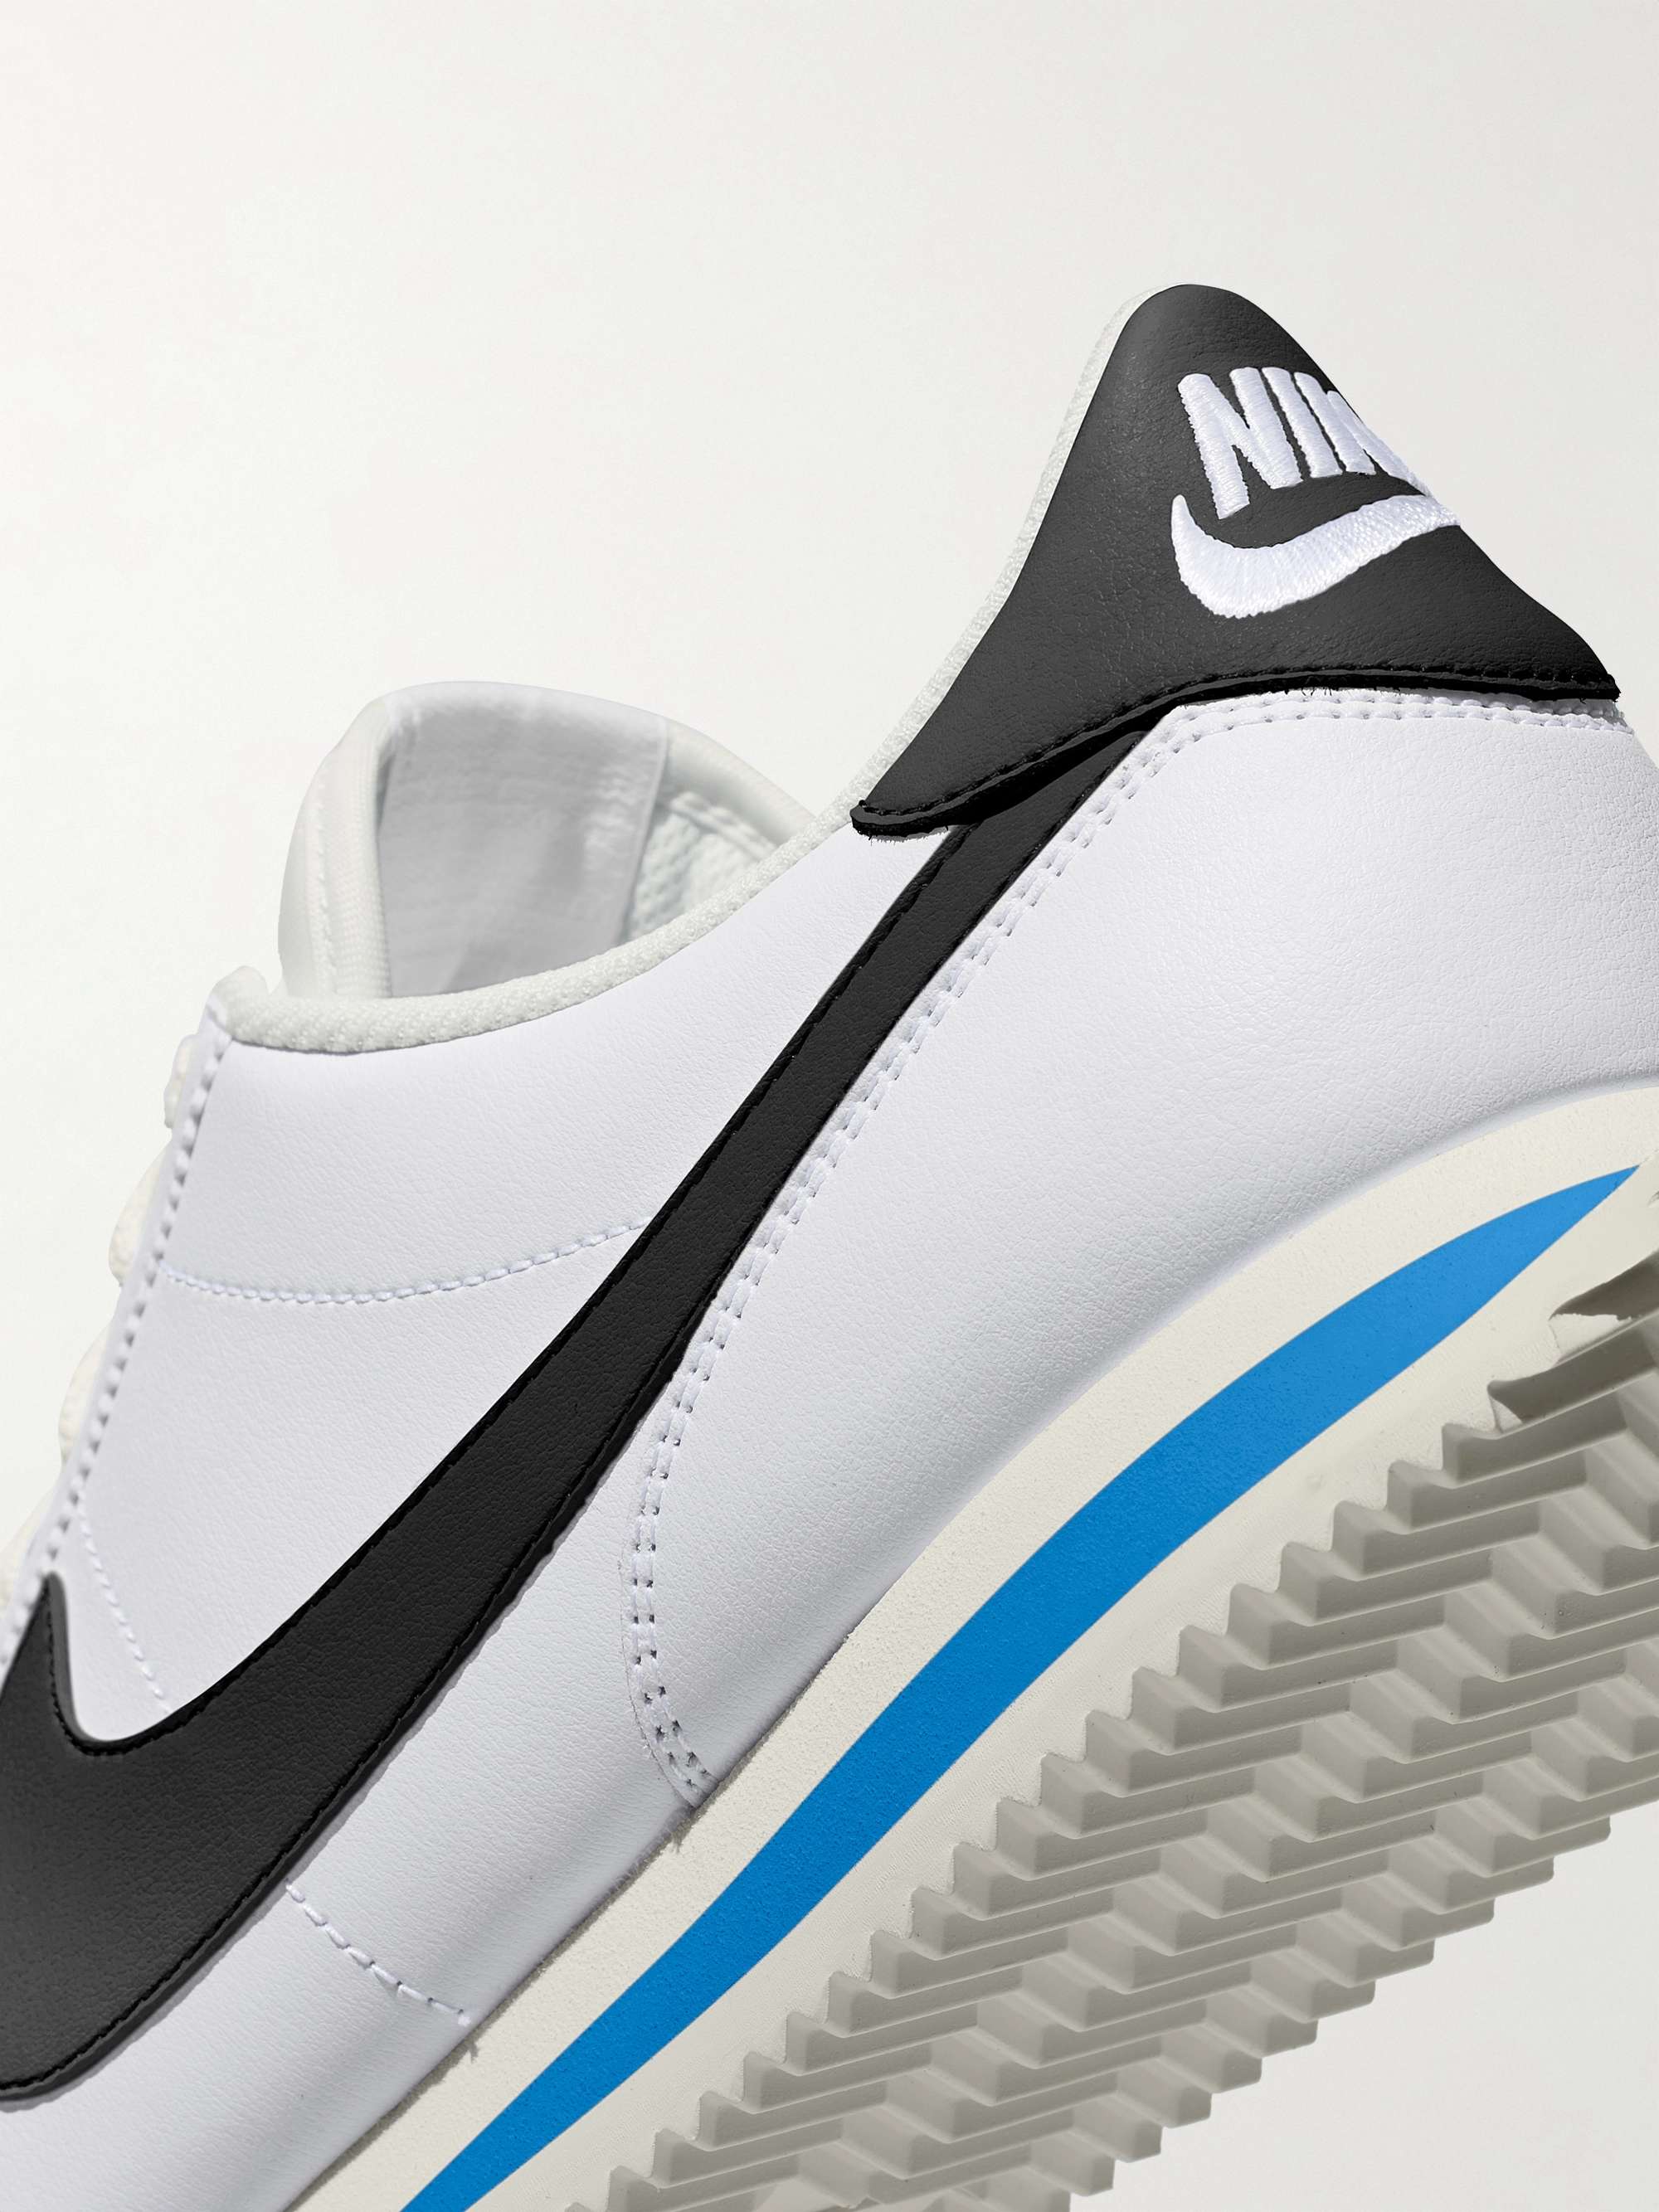 NIKE Cortez Leather Sneakers for Men | MR PORTER